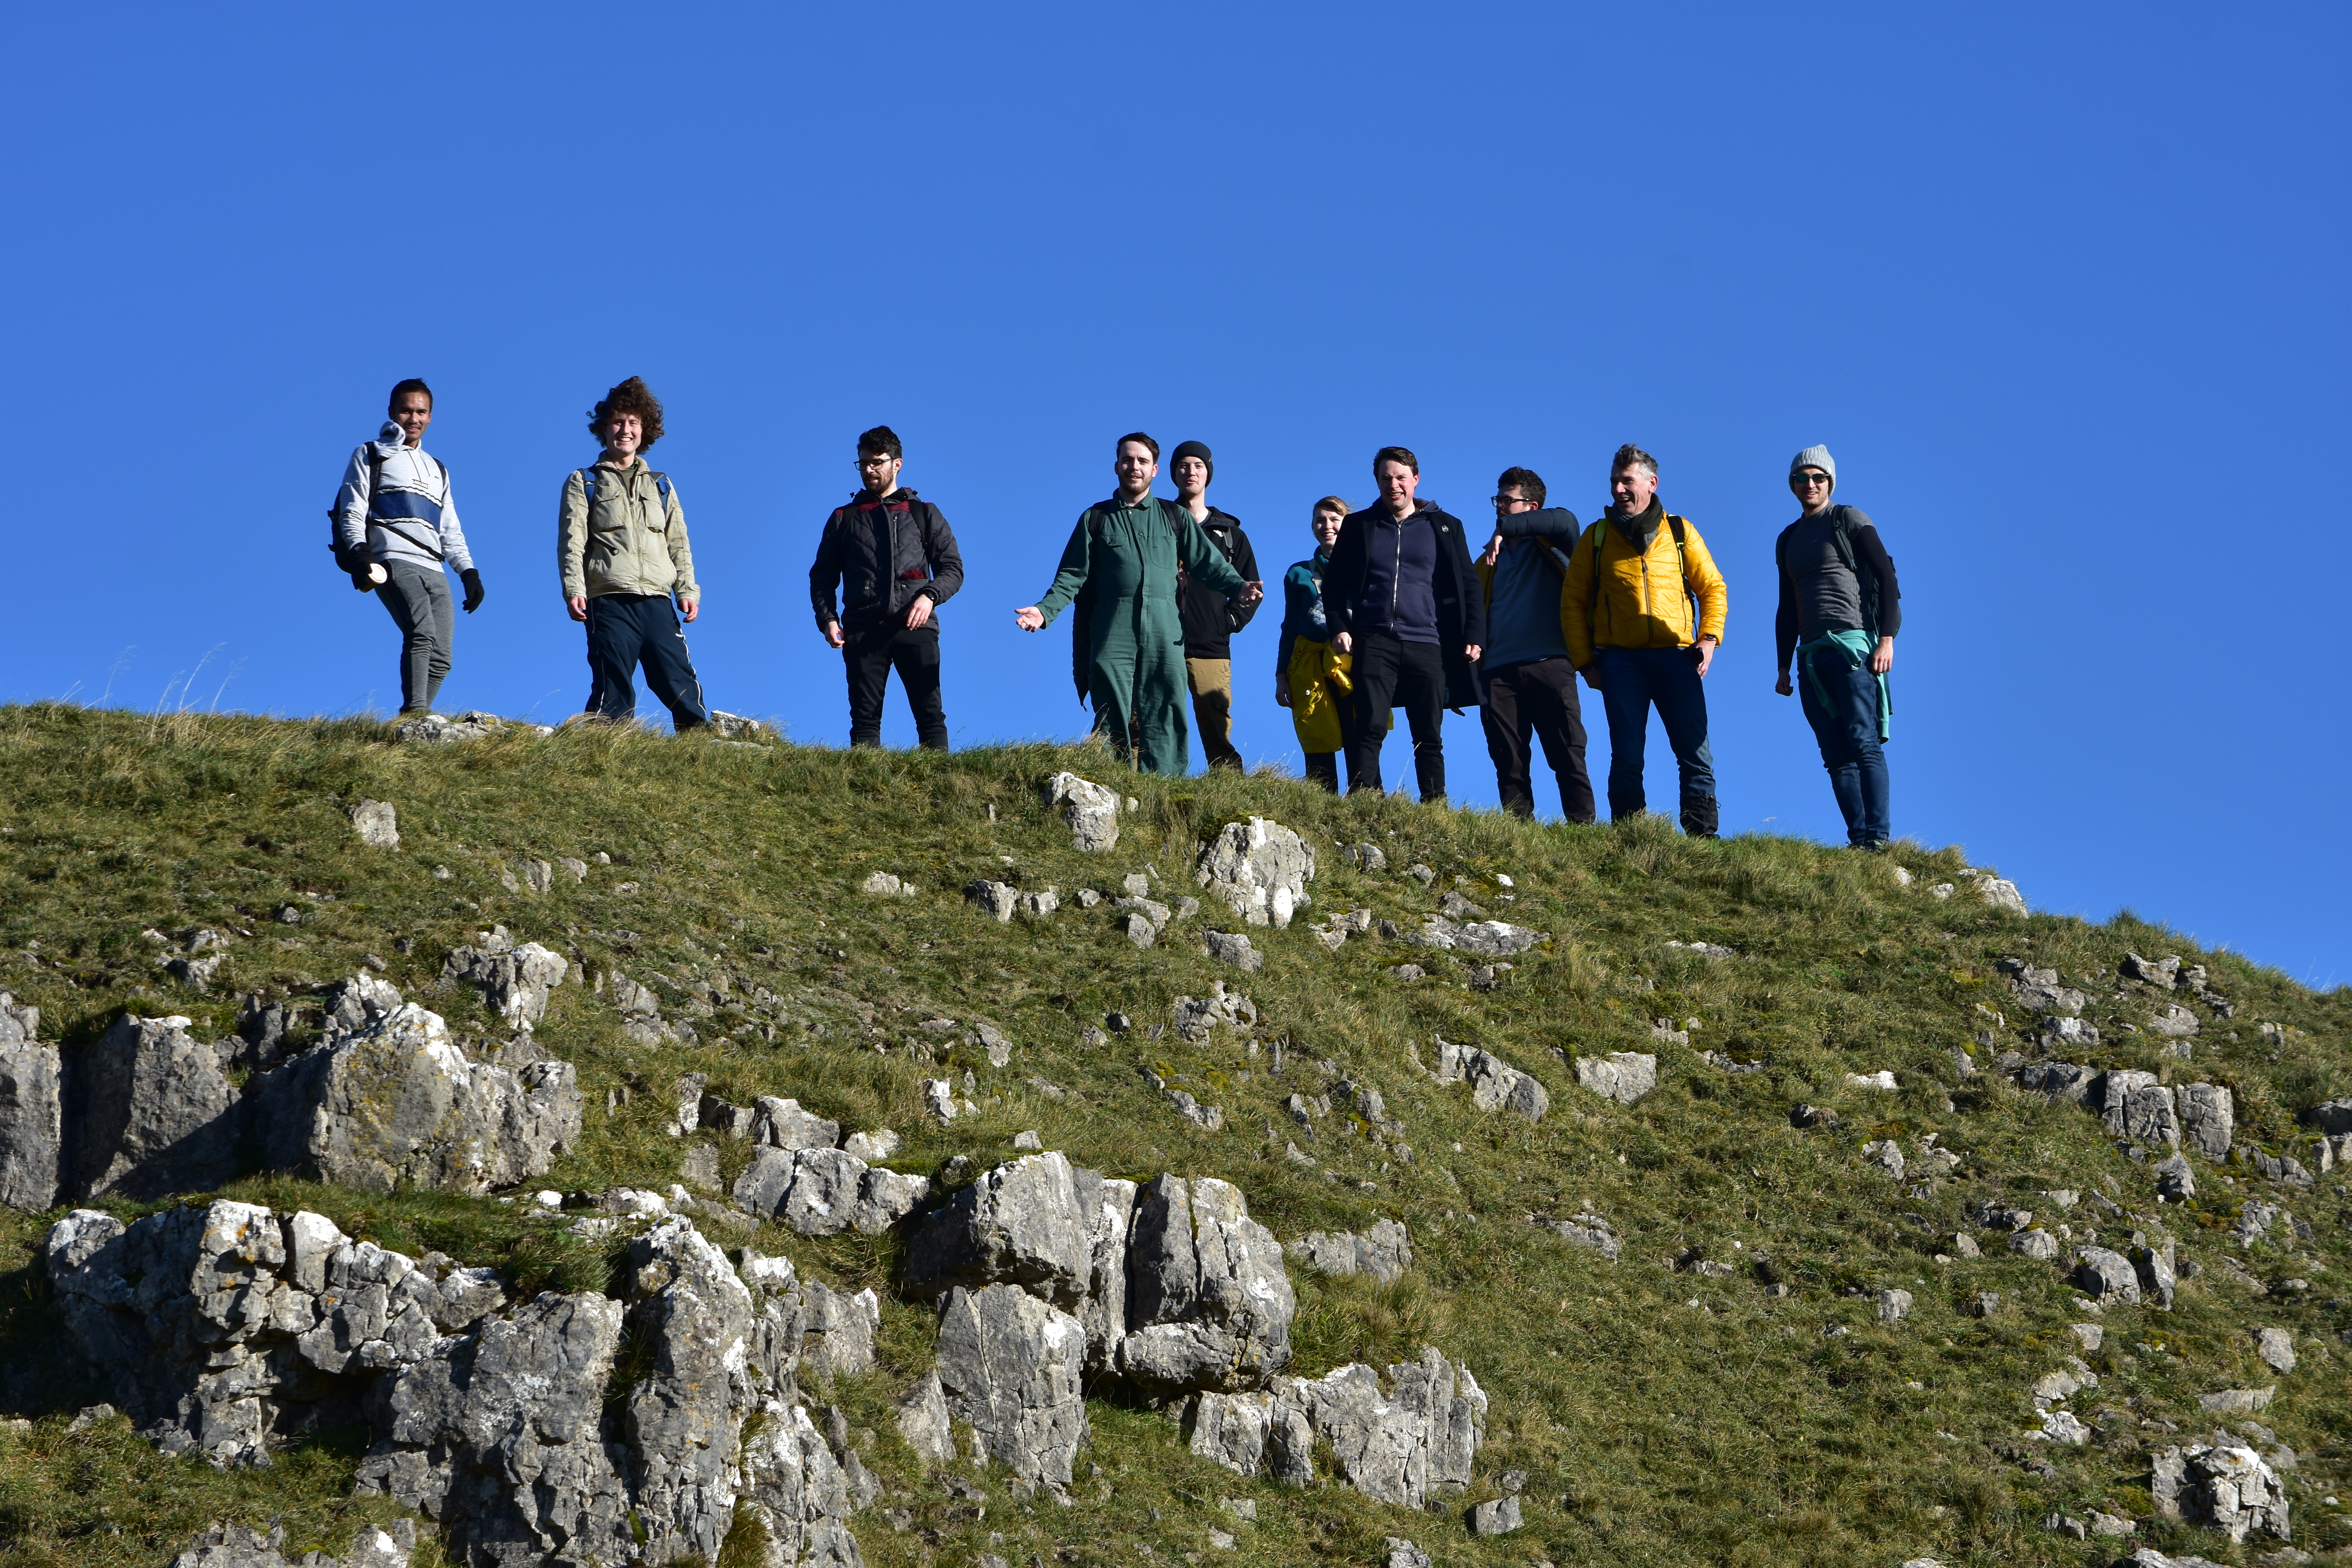 Part of the Fairlamb group on top of a hill at Malham Cove, 2023.